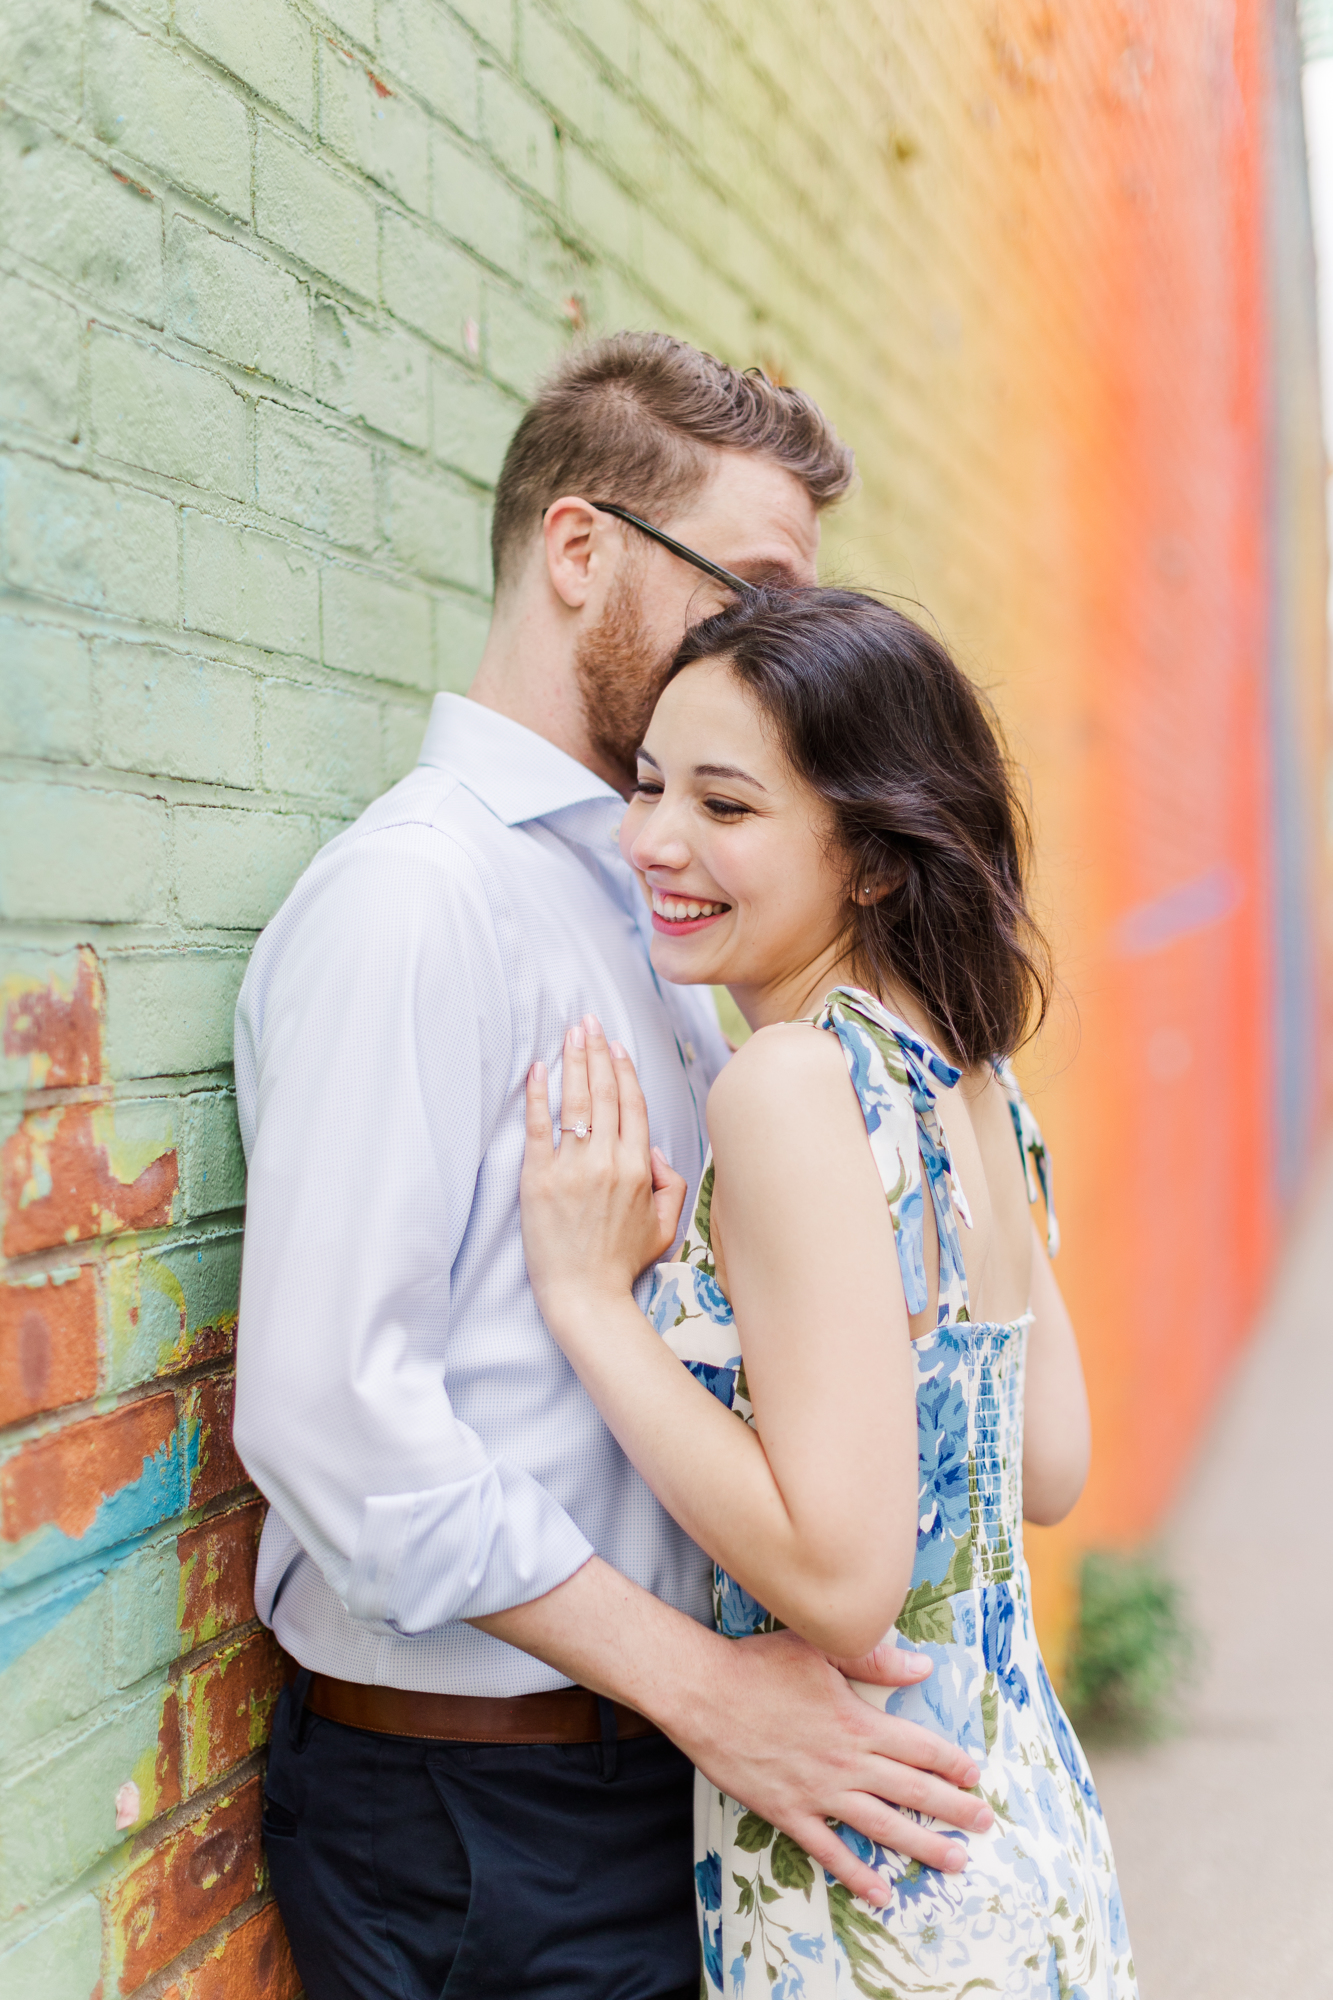 Amazing Engagement Photos in Brooklyn Heights